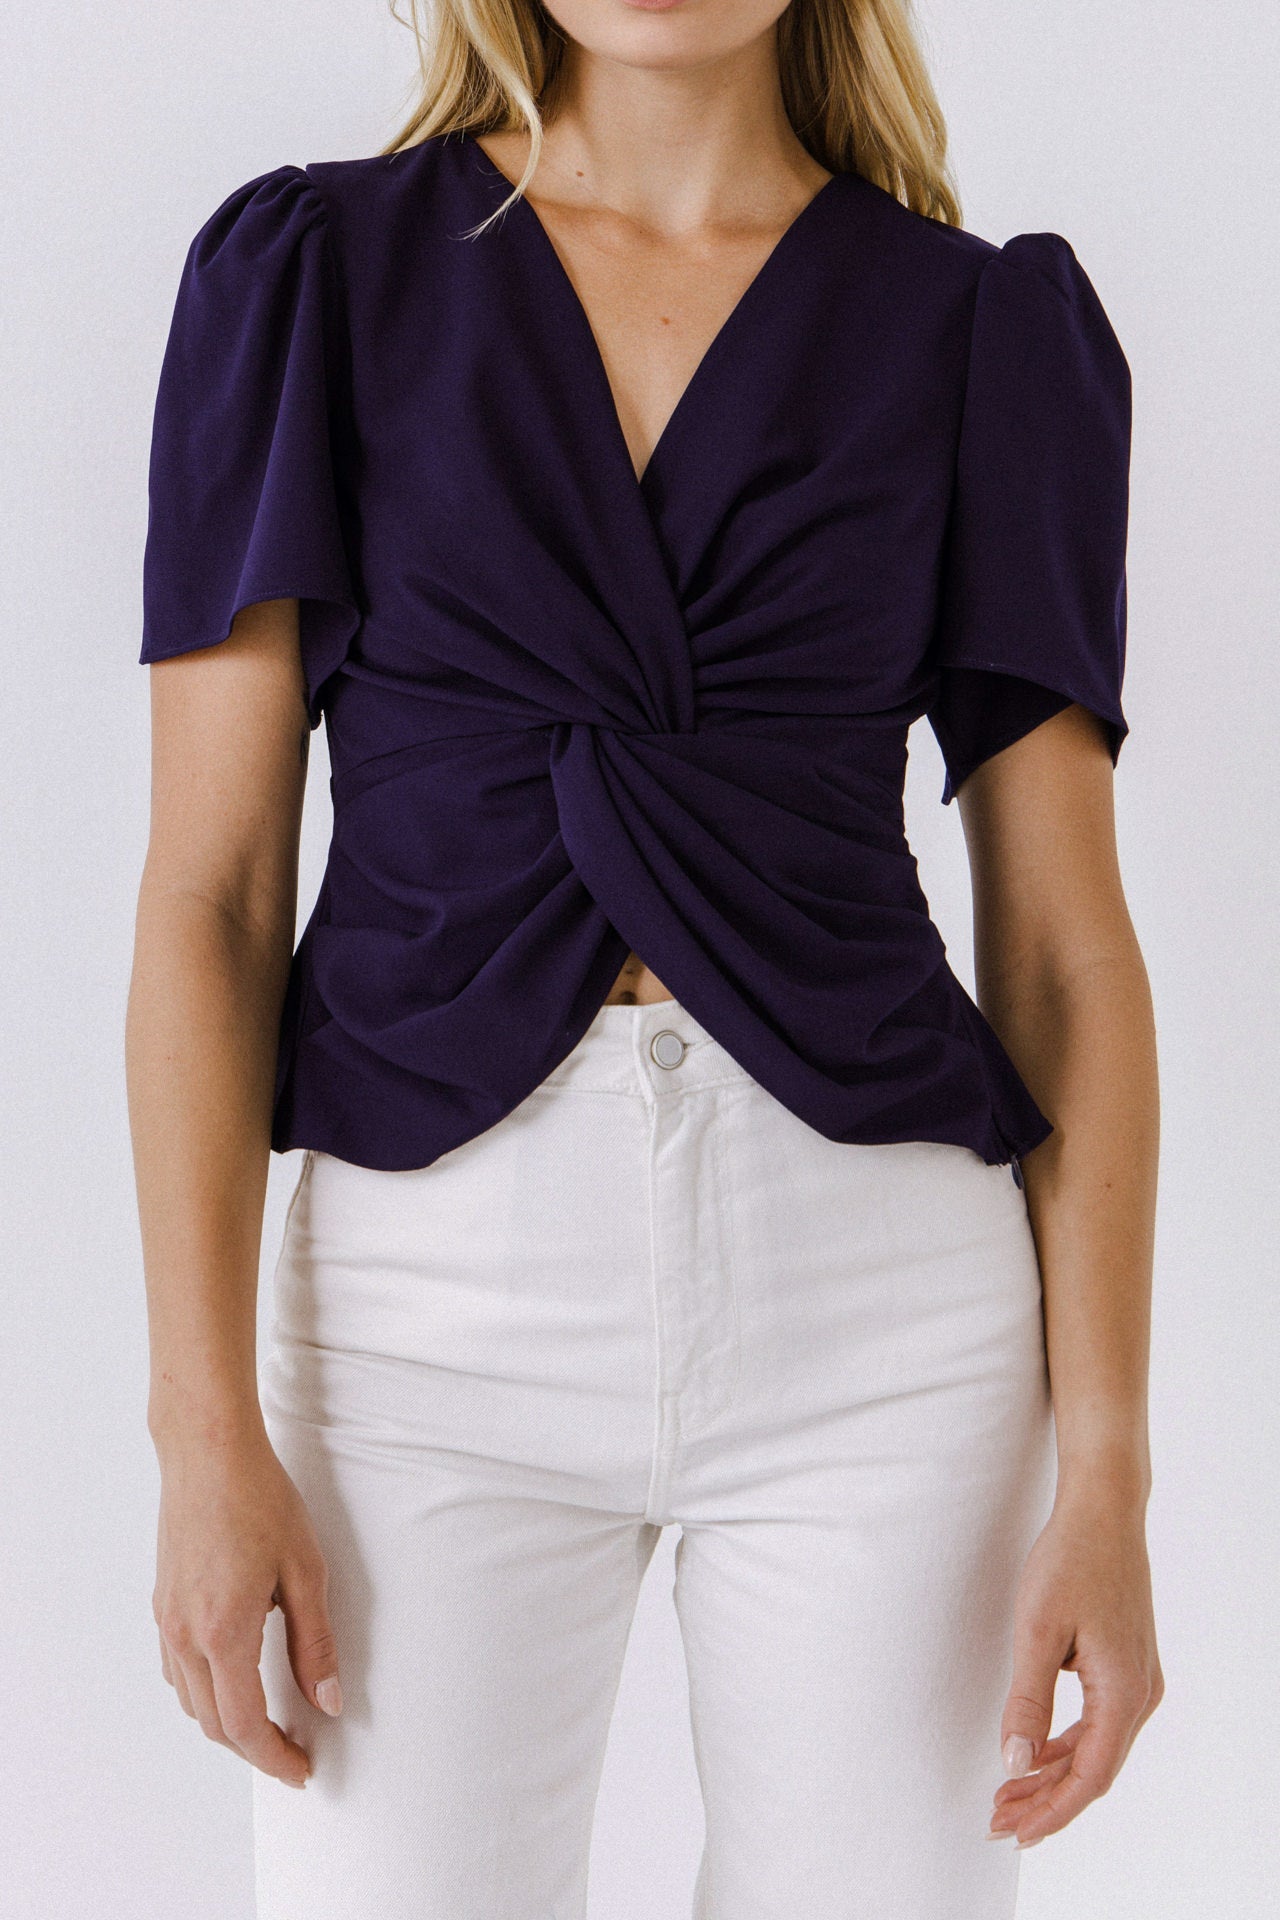 ENDLESS ROSE - Solid Knotted Top - TOPS available at Objectrare